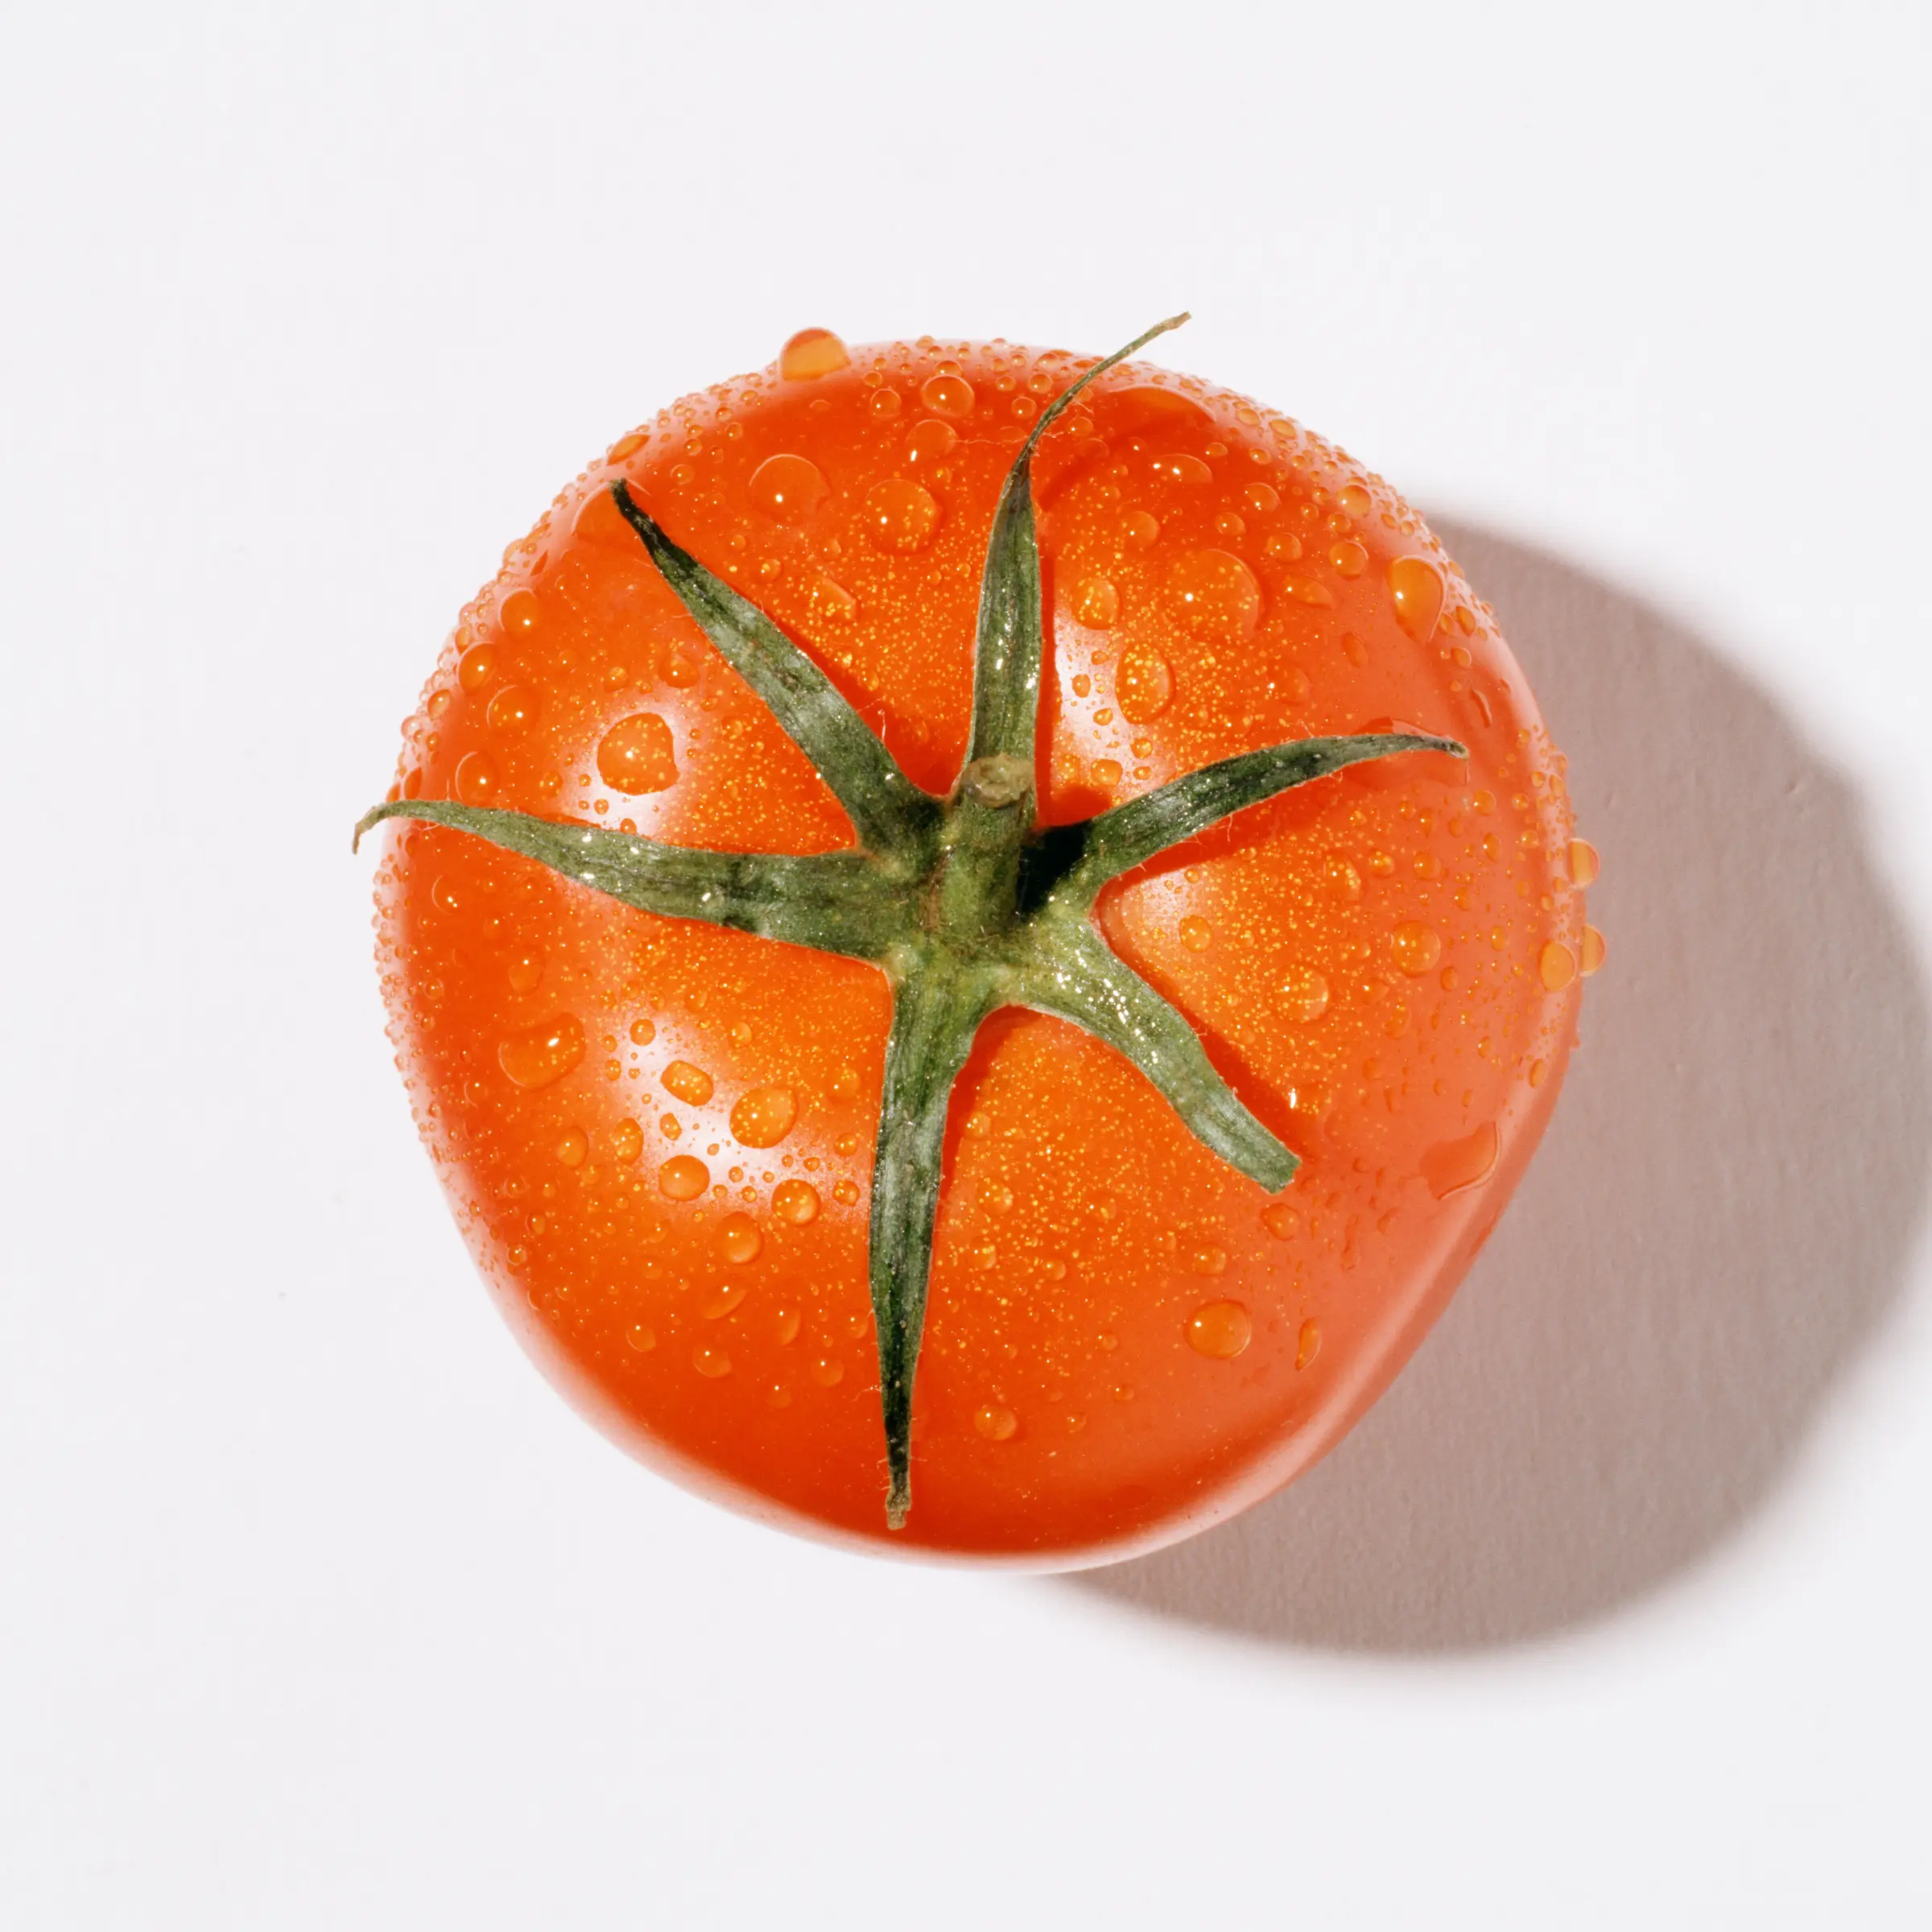 A ripe, red tomato represents our branding and photography work for SLYCE Coal Fired Pizza Company.